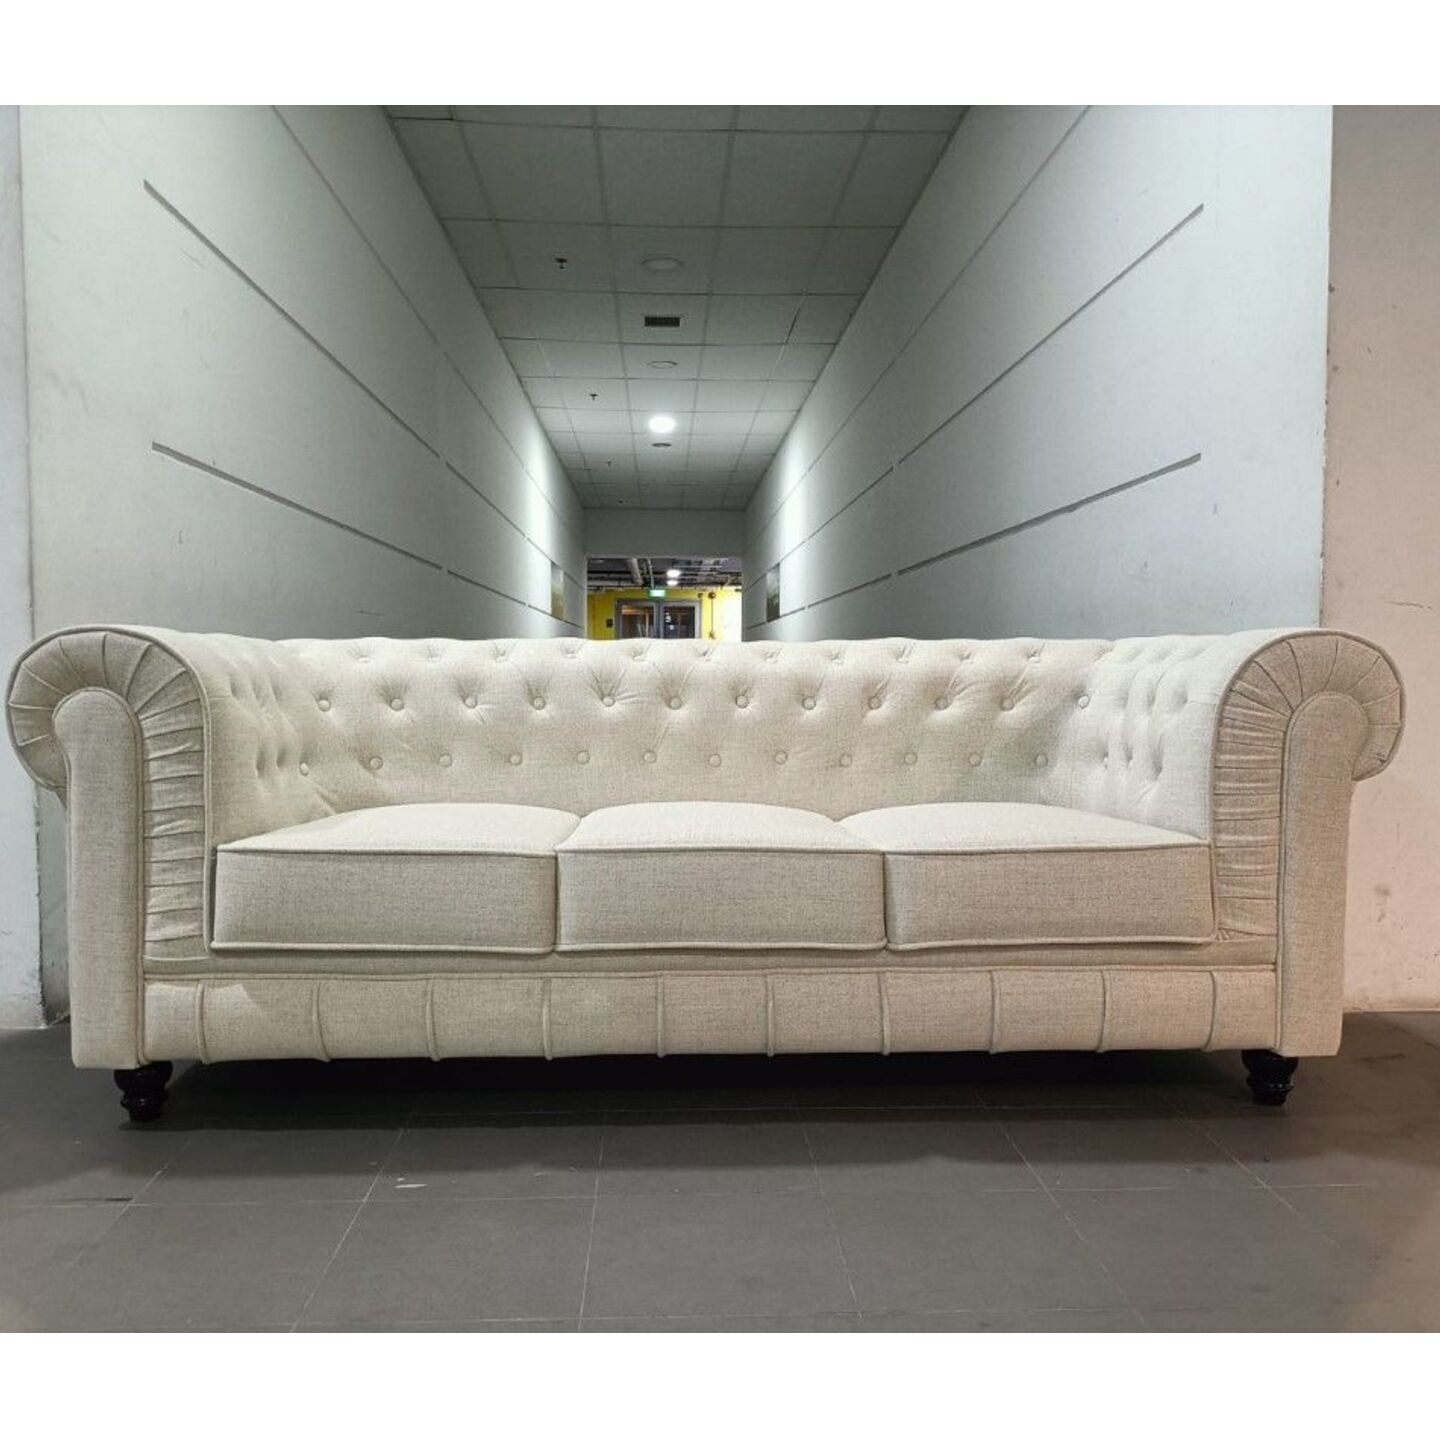 STAR BUY - CAT FRIENDLY SALVADO II 3 Seater Chesterfield Sofa in DOVER WHITE TECH FABRIC